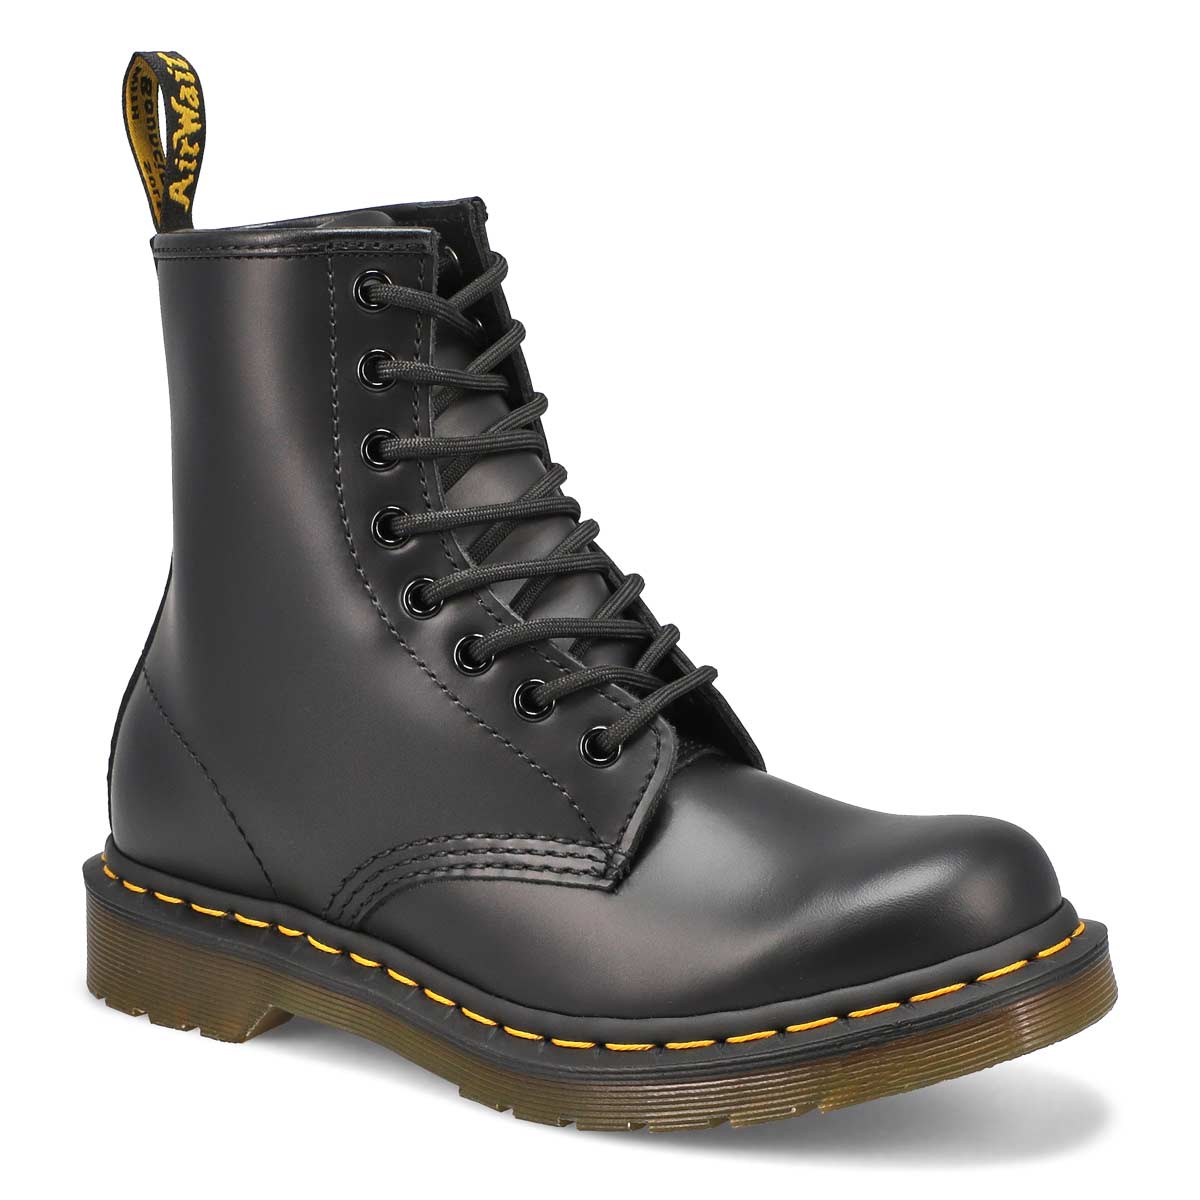 Dr Martens Ladies 1460 8 Eye Smooth Boot - Wh | SoftMoc.com